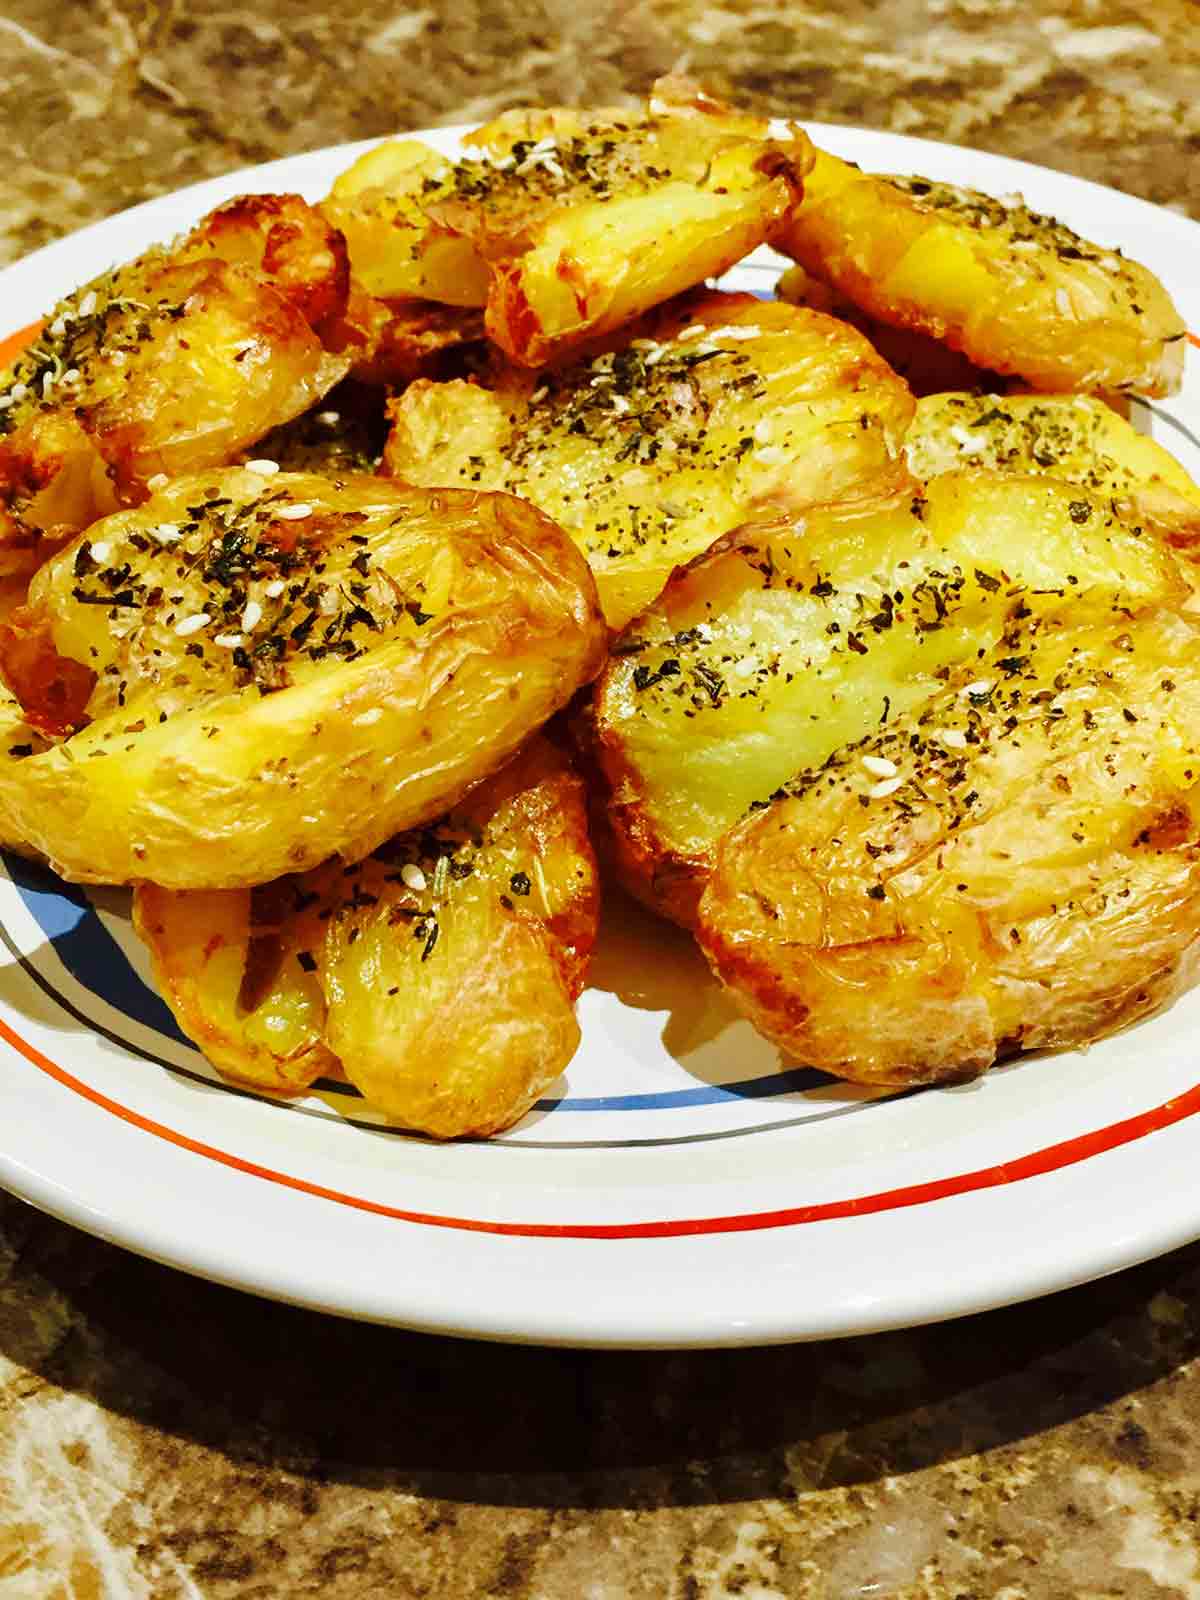 These crusty baked potato spuds are a simple and delicious potato side dish, a classic potato recipe that never fails to deliver.